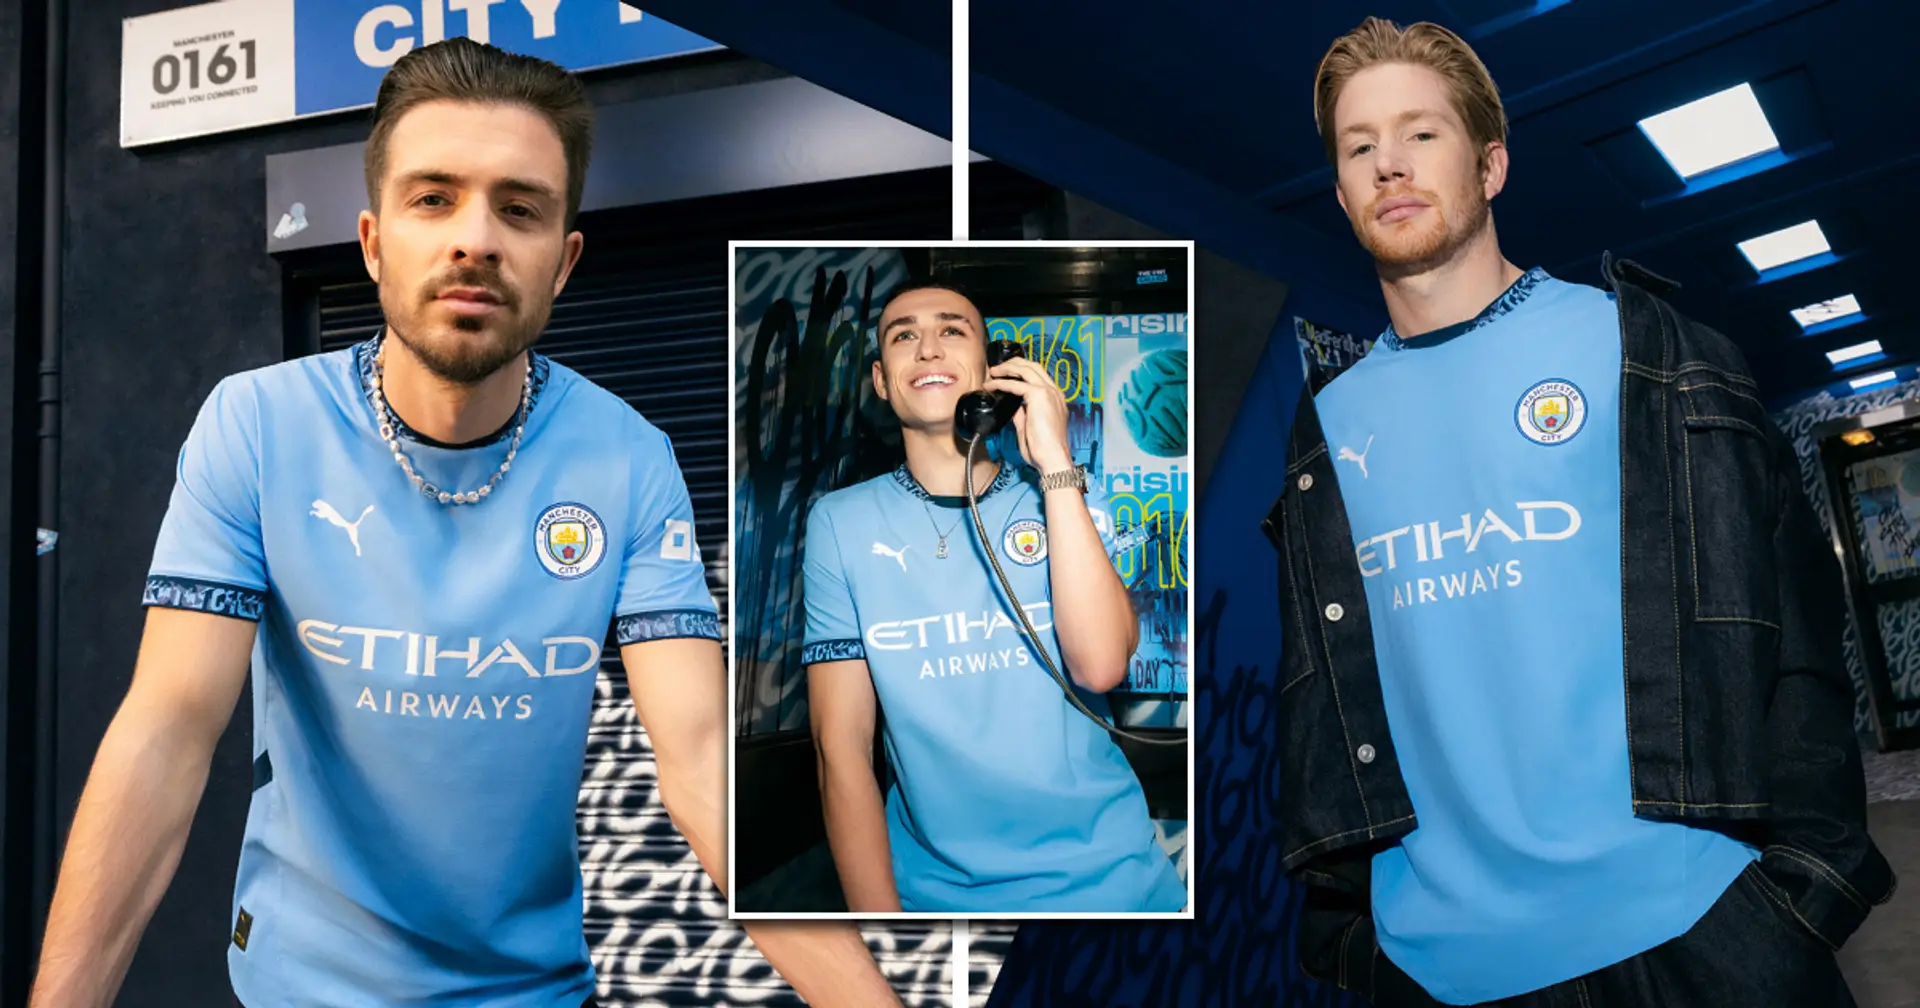 Man City's home kit reveal suggests one player will stay in the club despite transfer rumours 